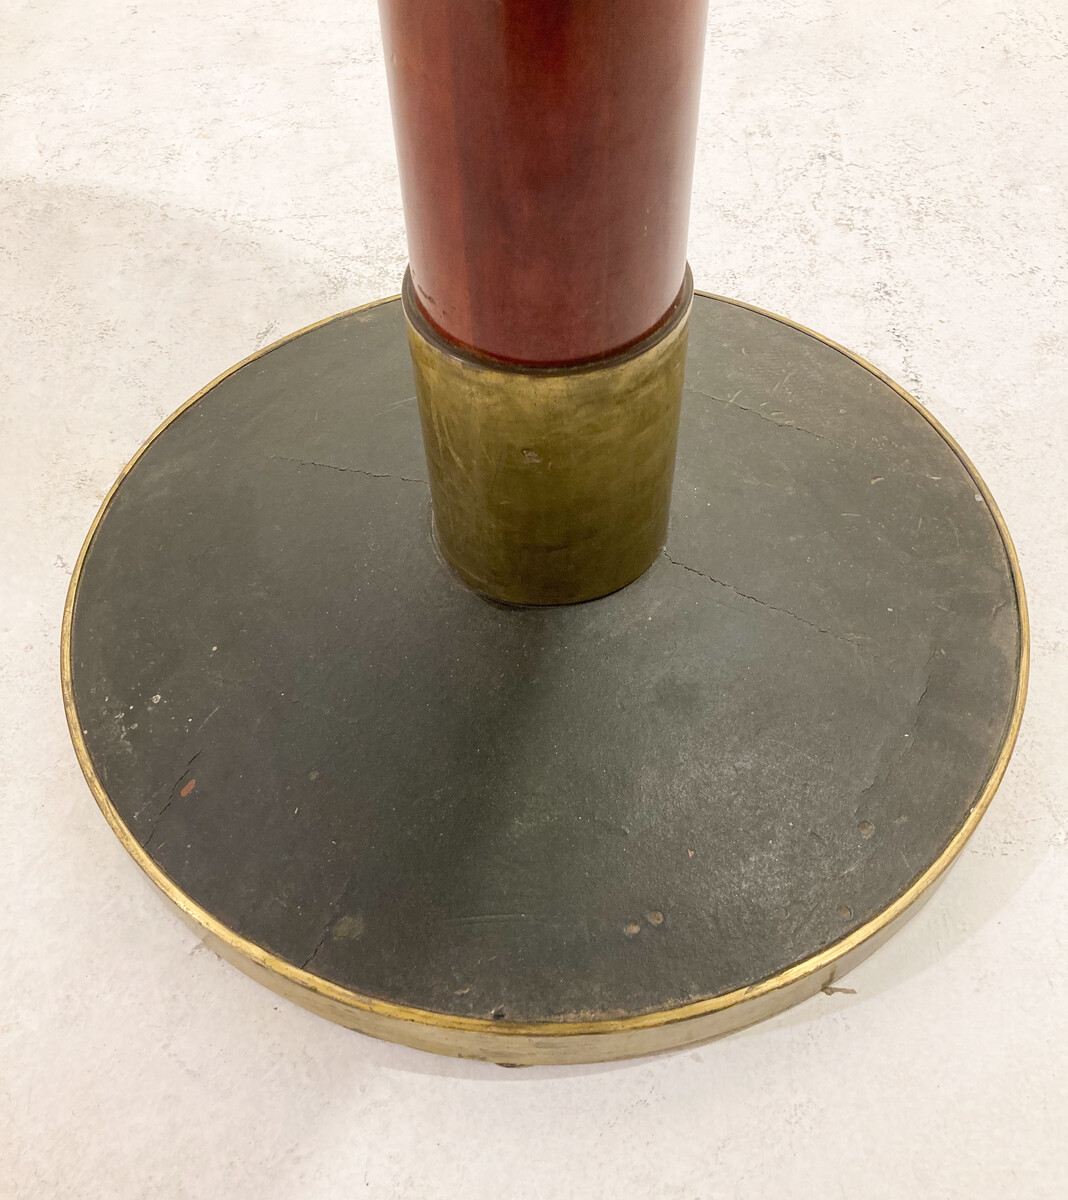 Brass and Wood Side Table